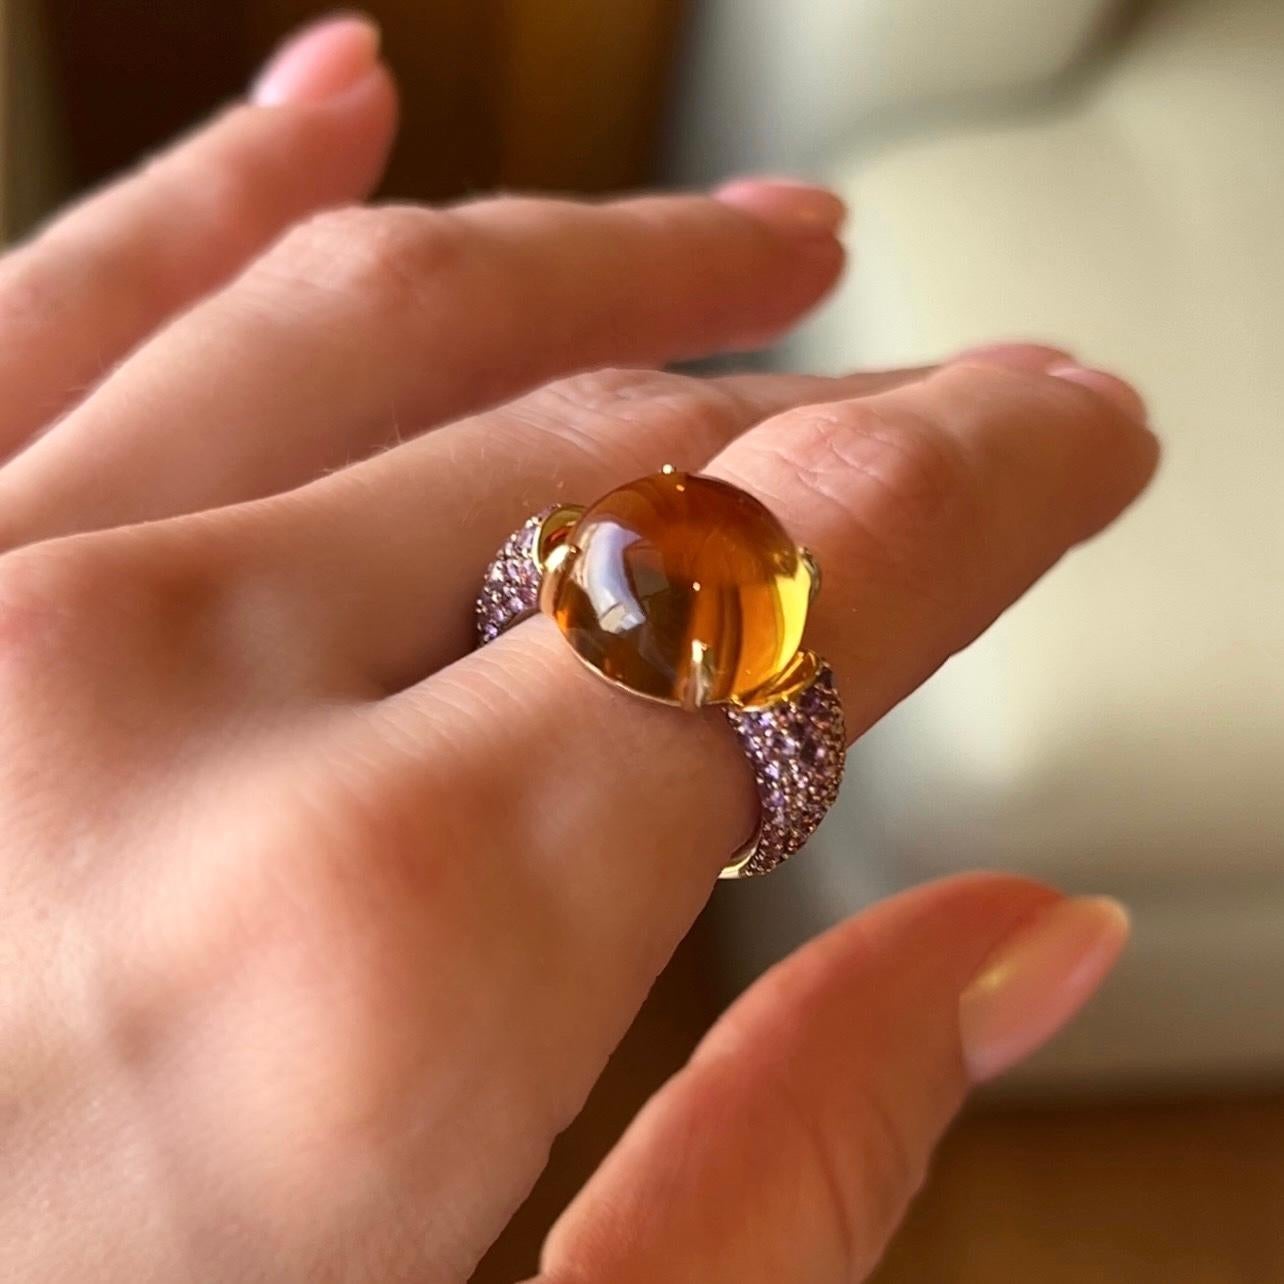 Not a ring, but a candy, not a candy, but a ring
Citrine in this ring is so bright, intense in color and nice looking, that it is looking like a real candy
We used citrine cabochon form here to make it more attractive and 